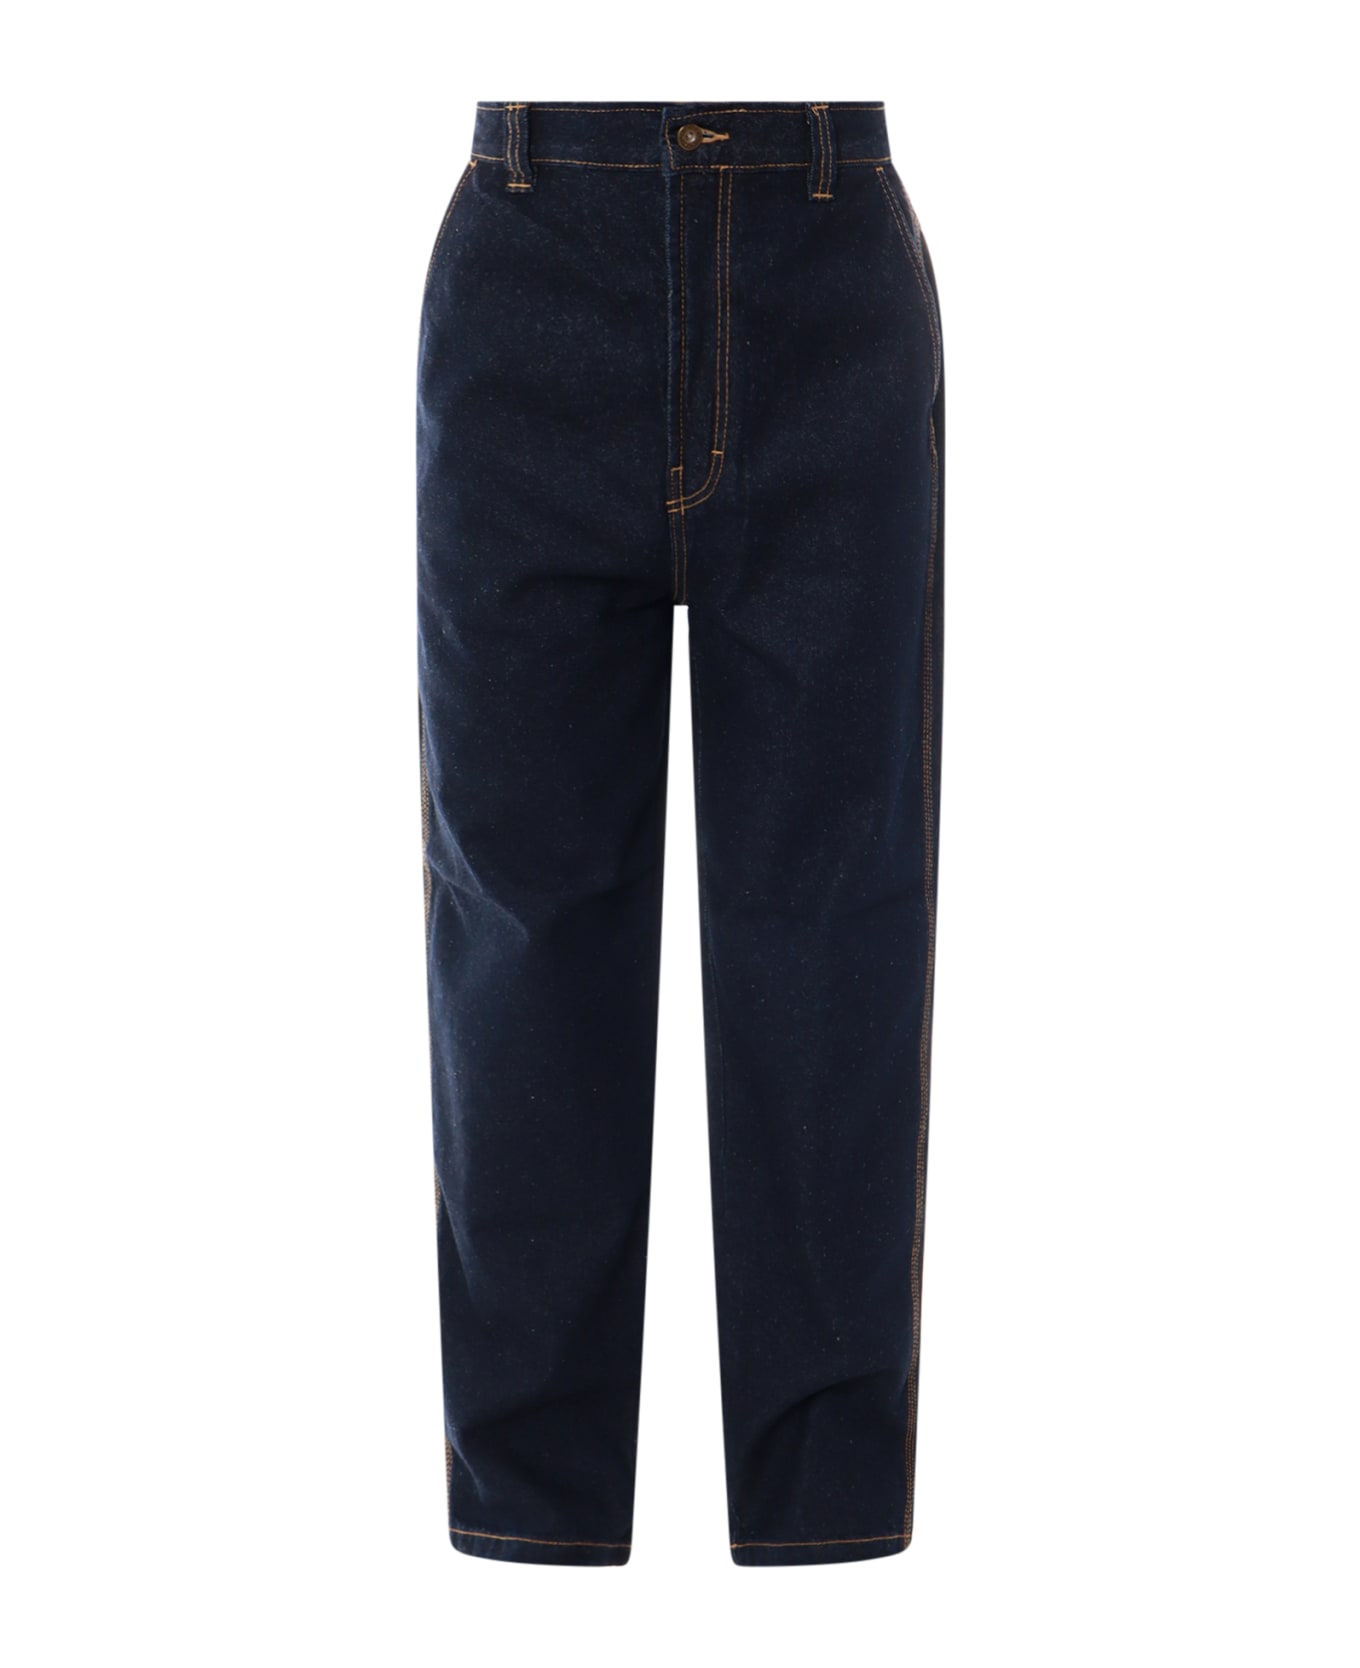 Dickies Madison Jeans - Blue